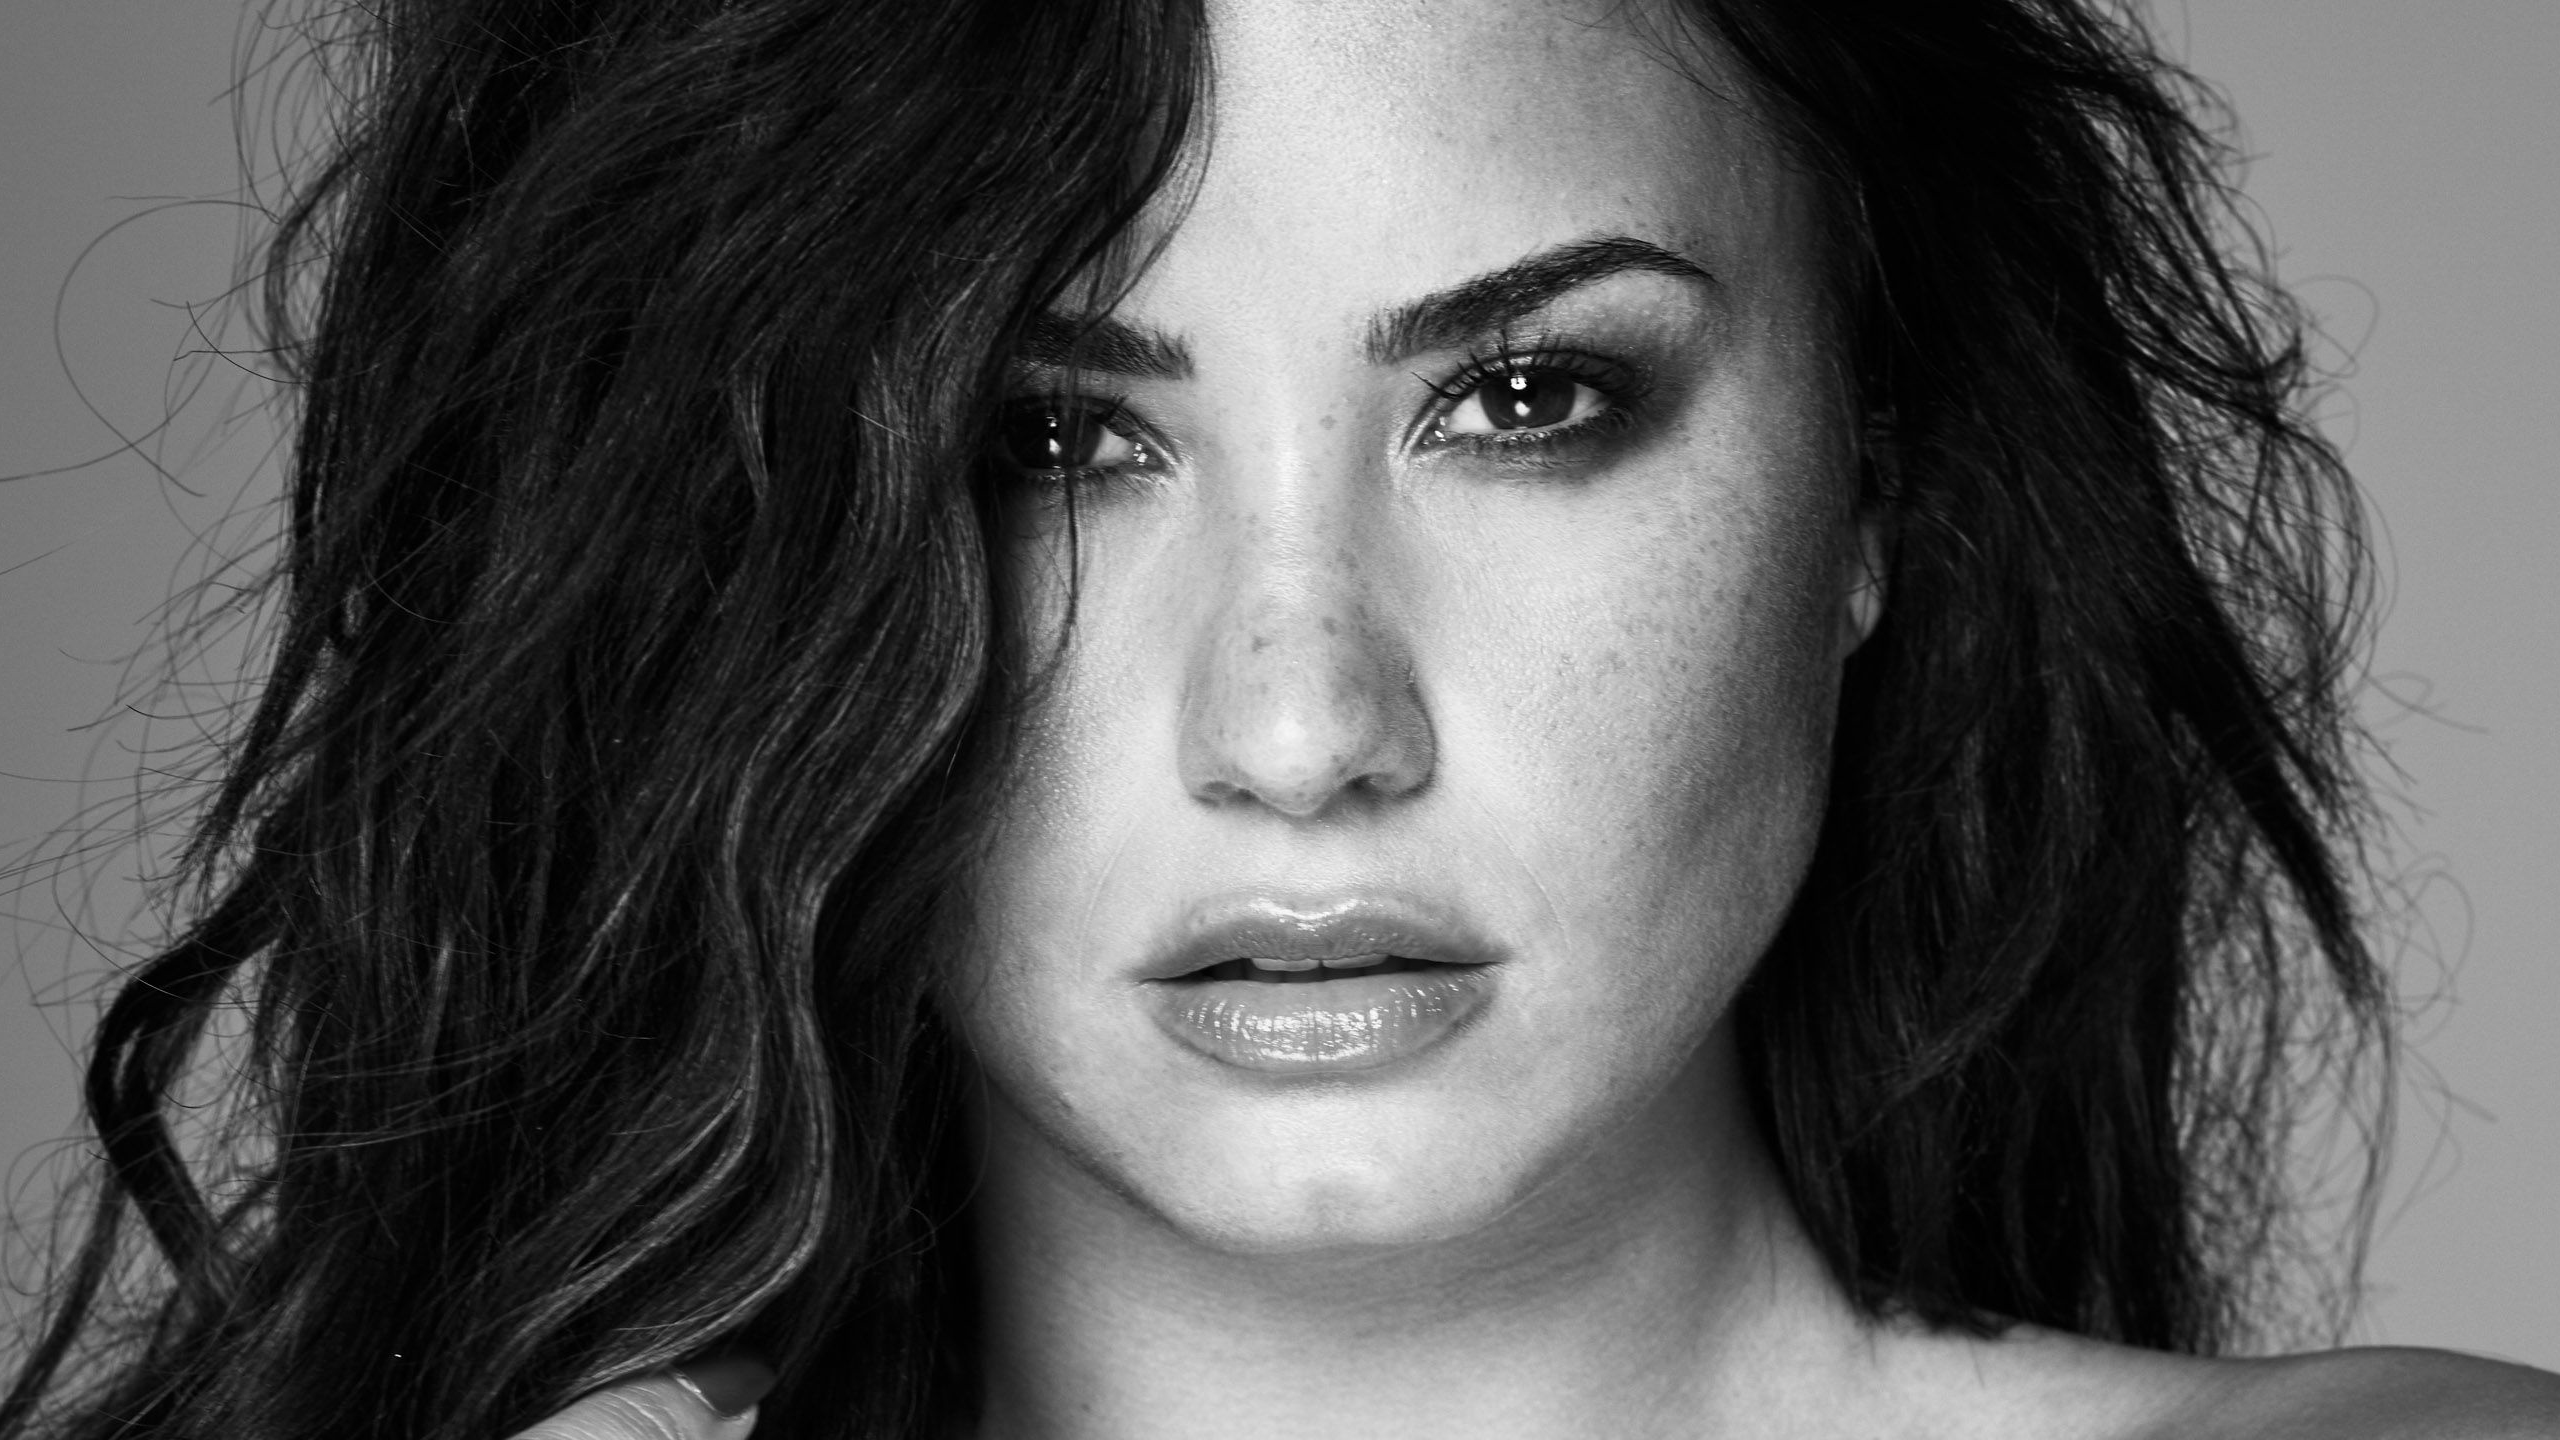 Demi Lovato Tell Me You Love Me Hd Wallpapers - Demi Lovato Tell Me You Love Me Cover Art - HD Wallpaper 